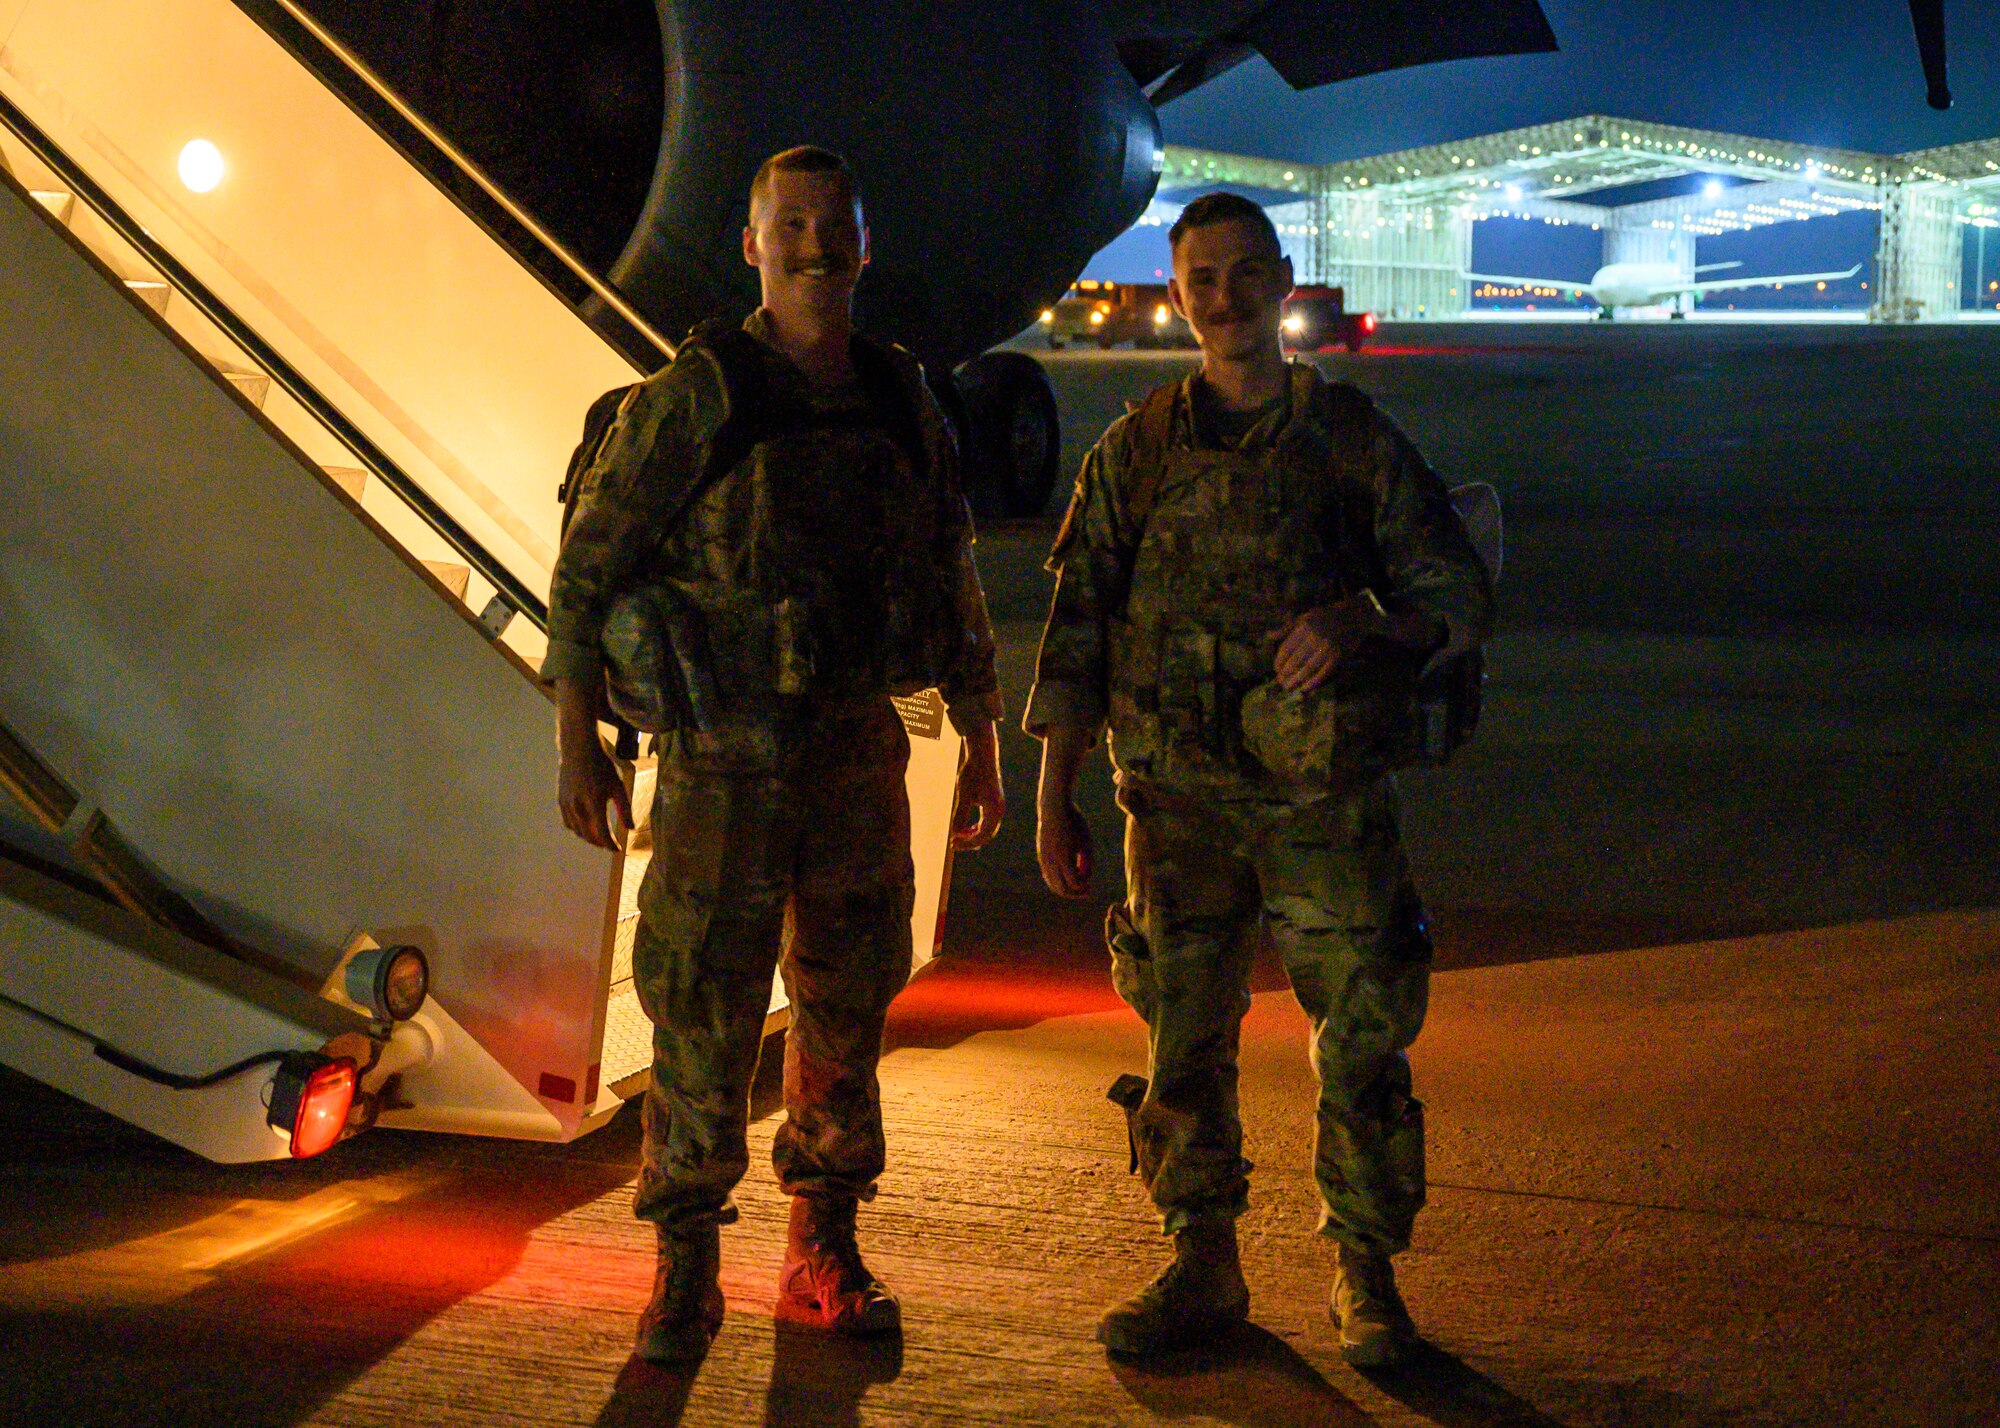 U.S. Air Force Staff Sgt. Harold S. Balcom III (left) and U.S. Staff Sgt. Jacob T. Crabtree (right), air traffic control liaisons assigned to the 378th Expeditionary Operations Support Squadron, pose for a photo on the flightline at Prince Sultan Air Base, Kingdom of Saudi Arabia, just after returning from a forward deployment to Afghanistan, Aug. 31, 2021. The two Airmen joined coalition forces in providing air traffic control support for non-combatant evacuation operations at Hamid Karzai International Airport, Kabul, controlling more than 1,000 aircraft over a 12-day period and contributing to the evacuation of over 120,000 personnel. (U.S. Air Force photo by Senior Airman Samuel Earick).